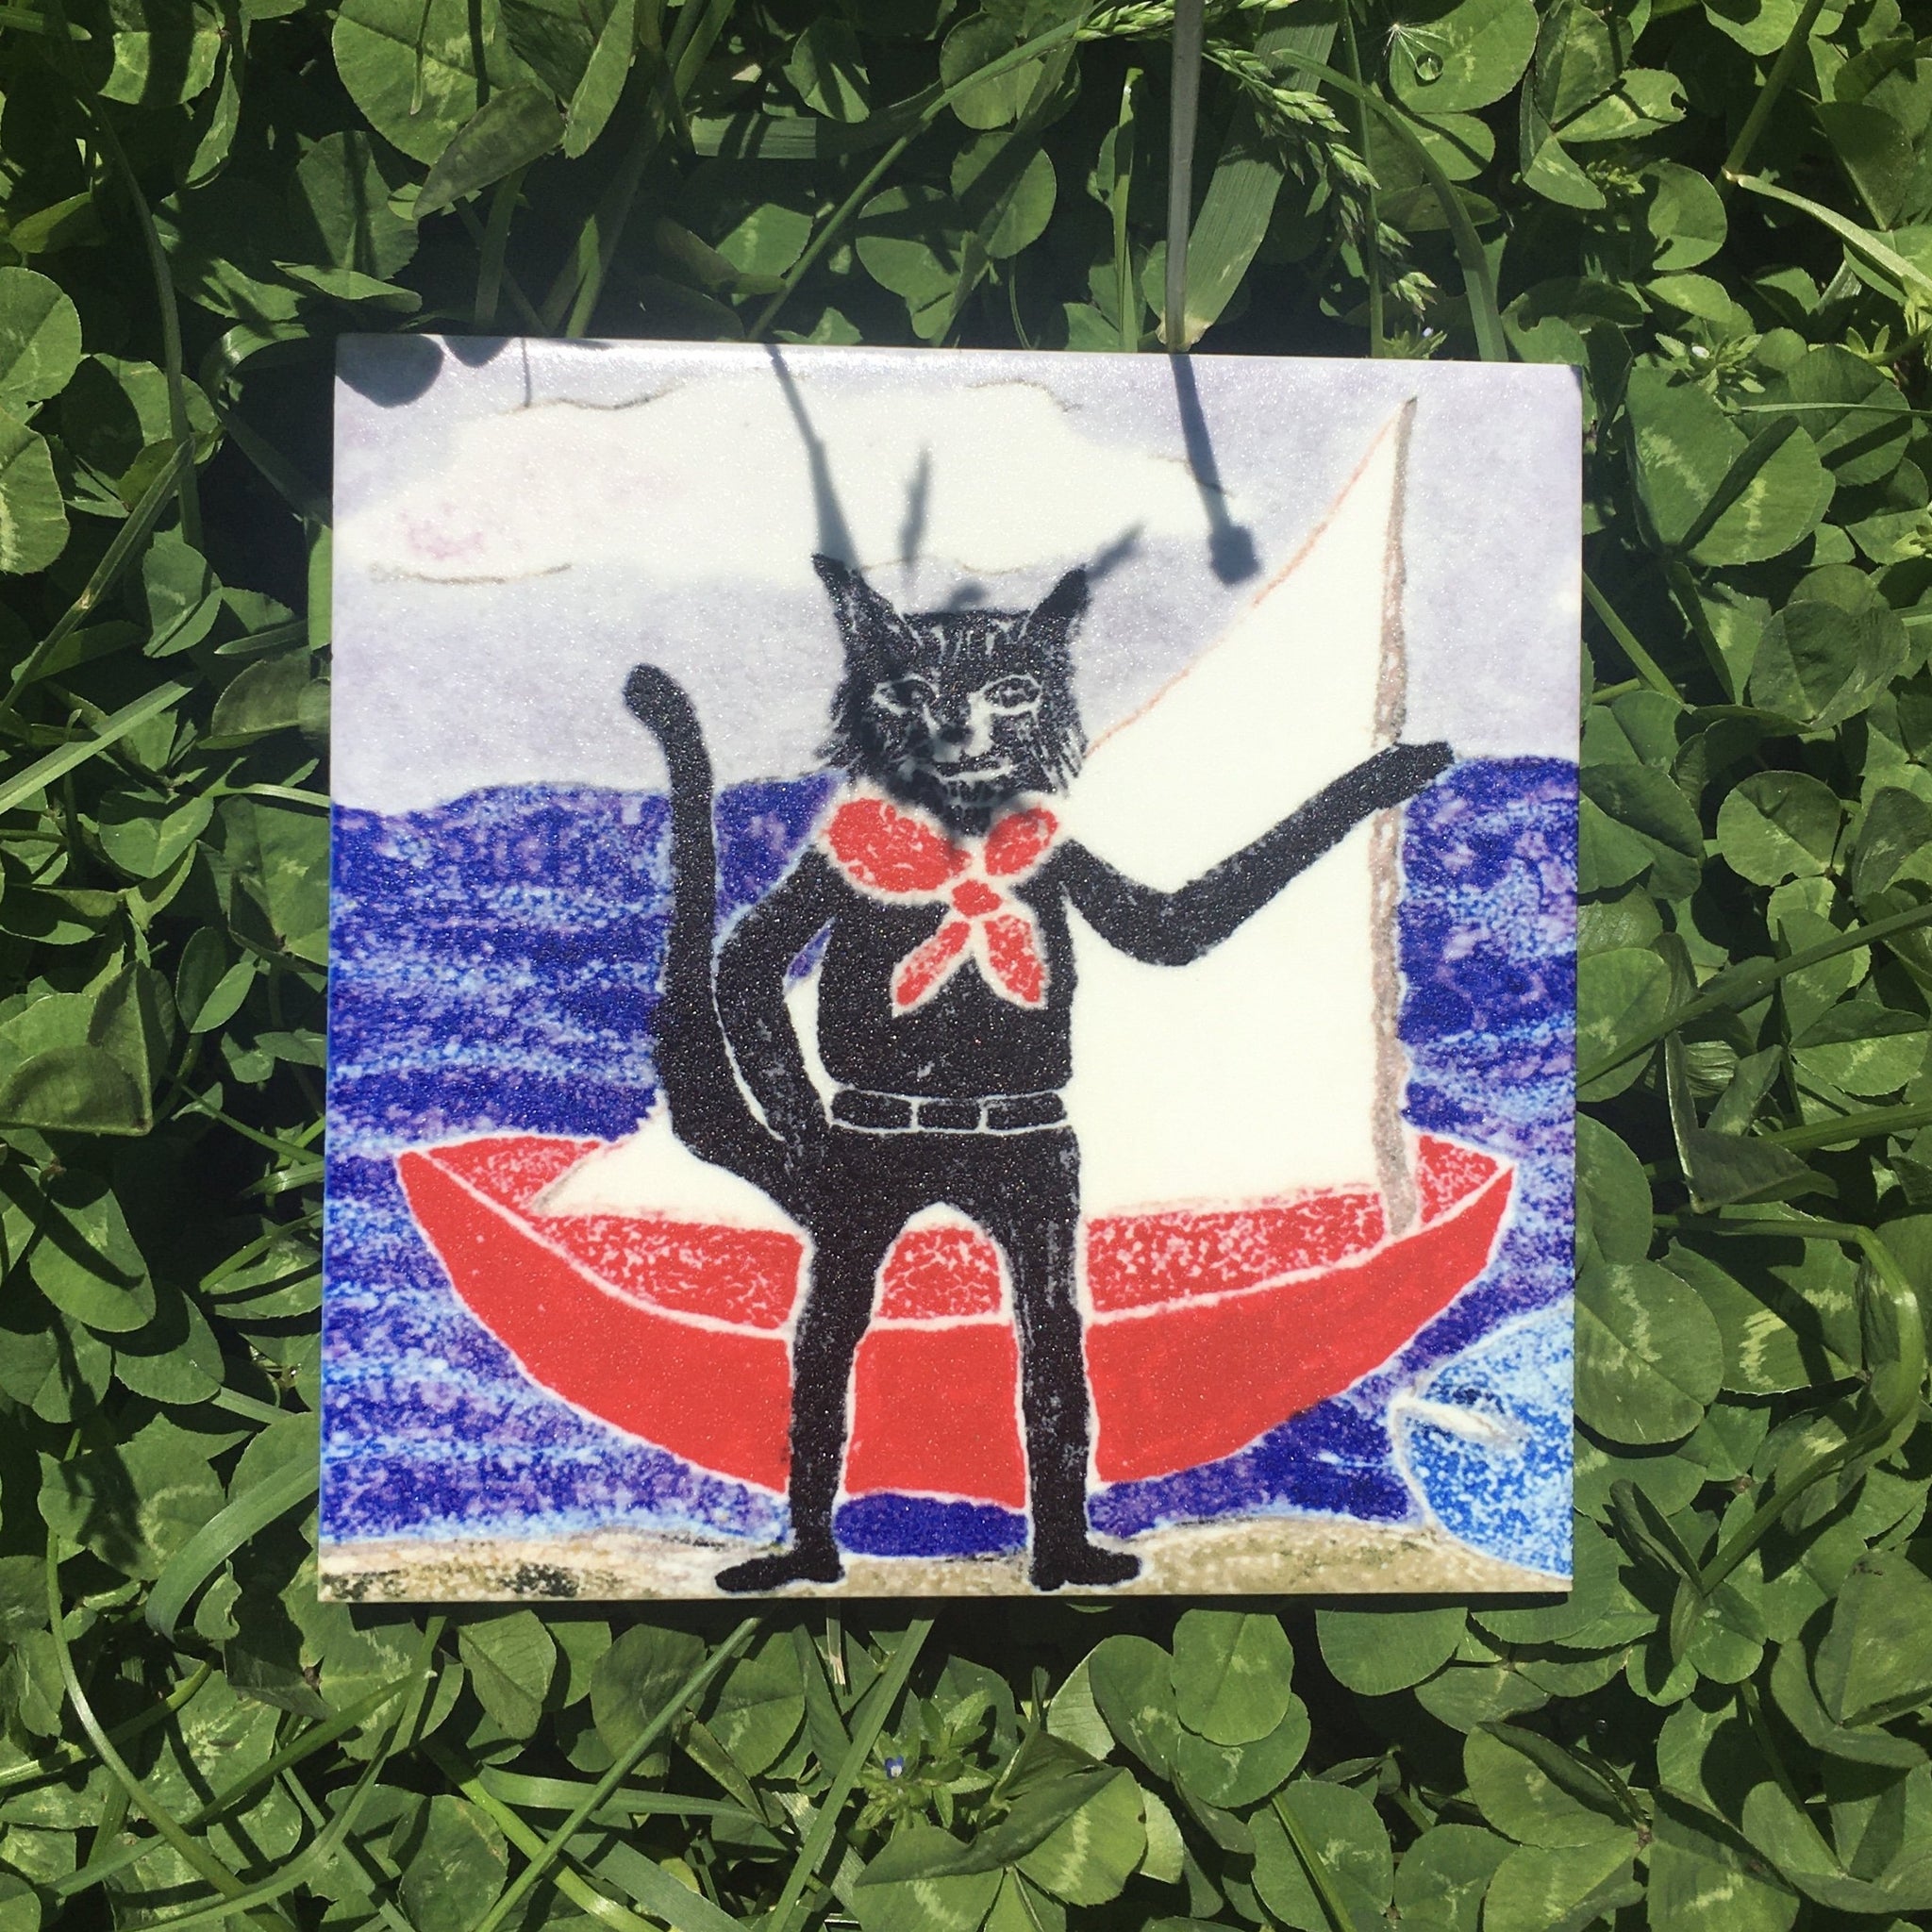 Ceramic tile coaster. Cat and sailboat. Top image. Vitrene by Christine and Bruce Green. Pottery and artwork from Micanopy Florida.